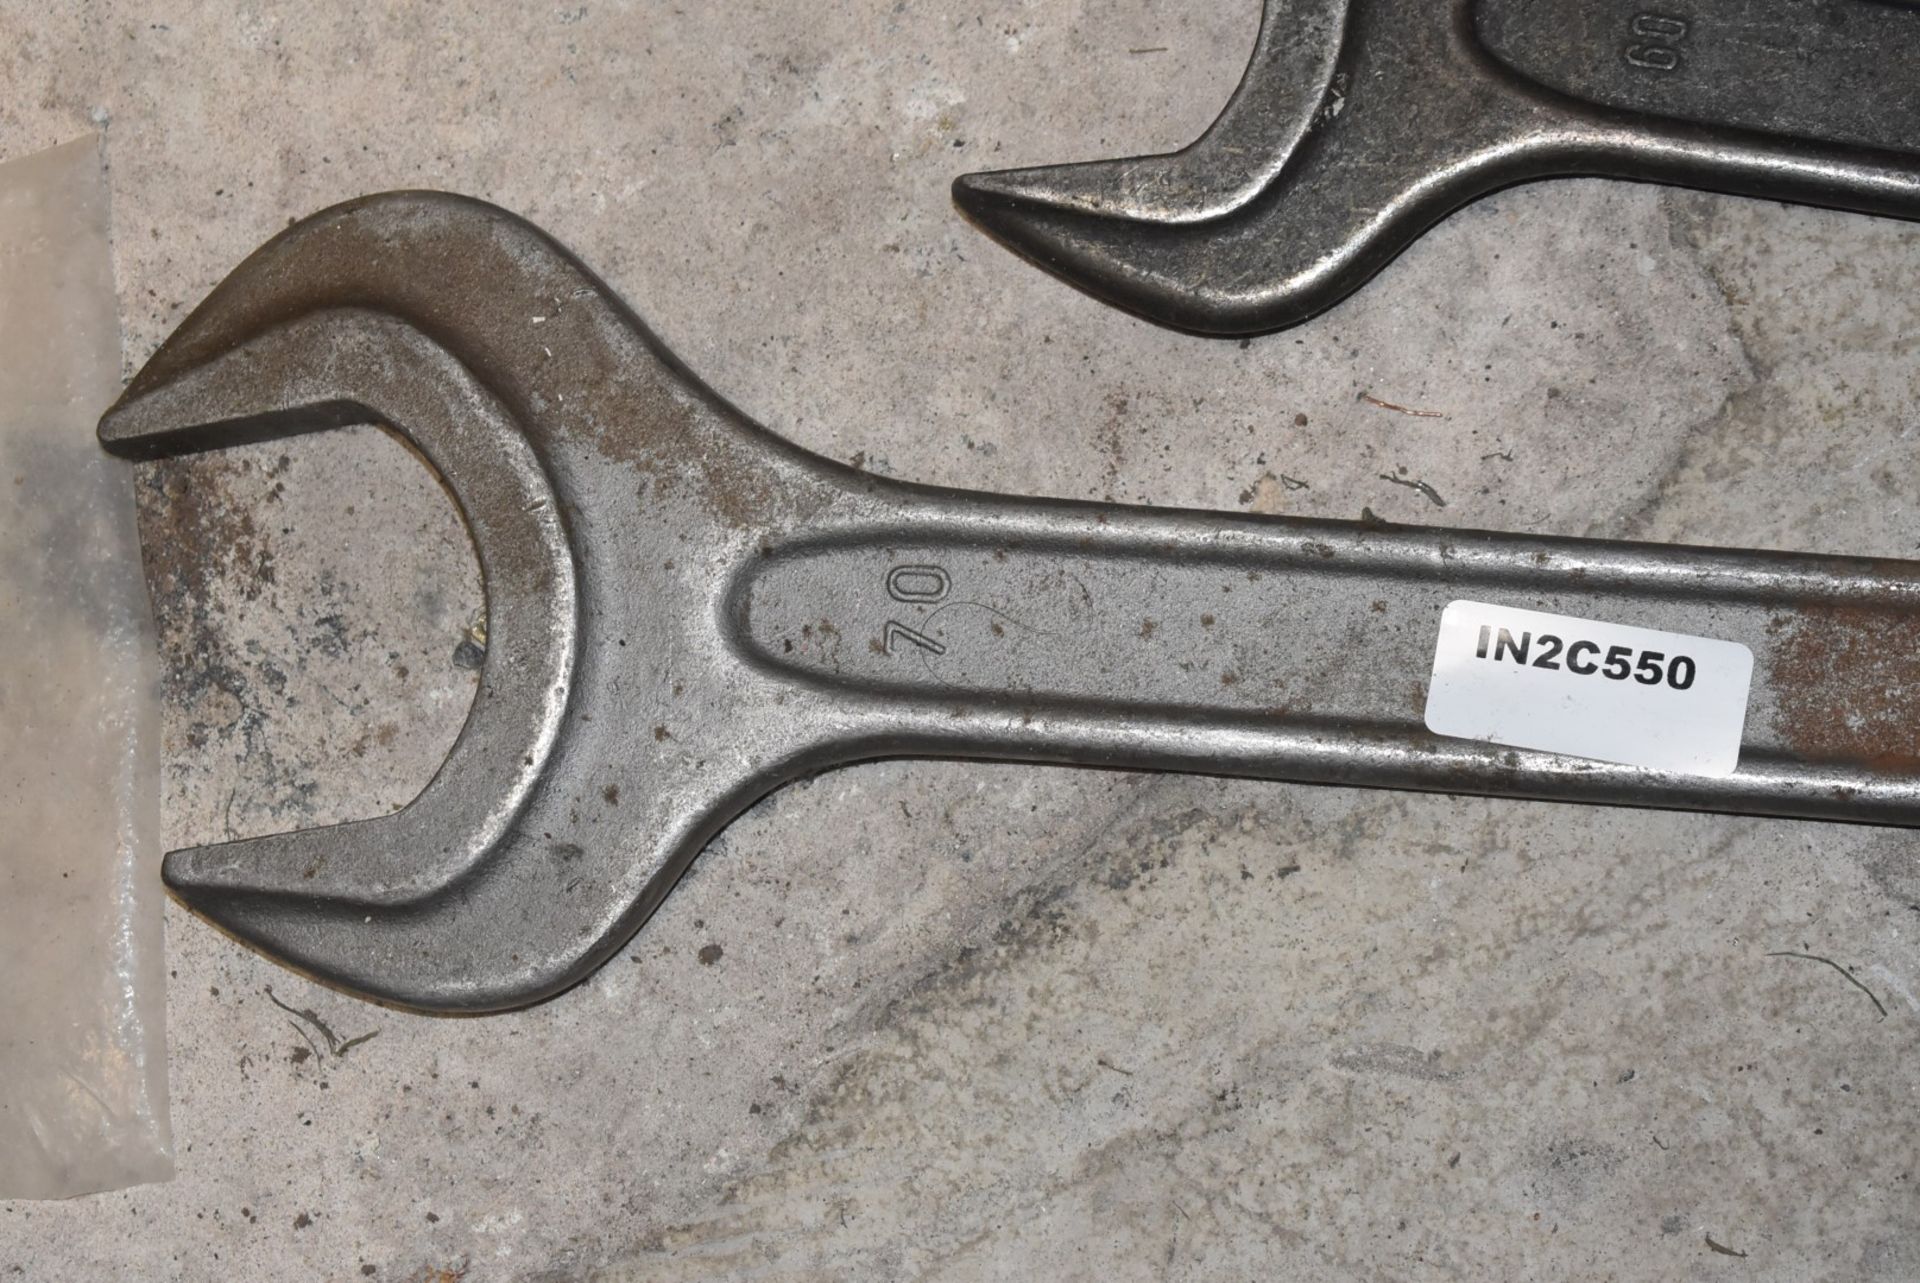 3 x Large Industrial Spanners - Image 2 of 6